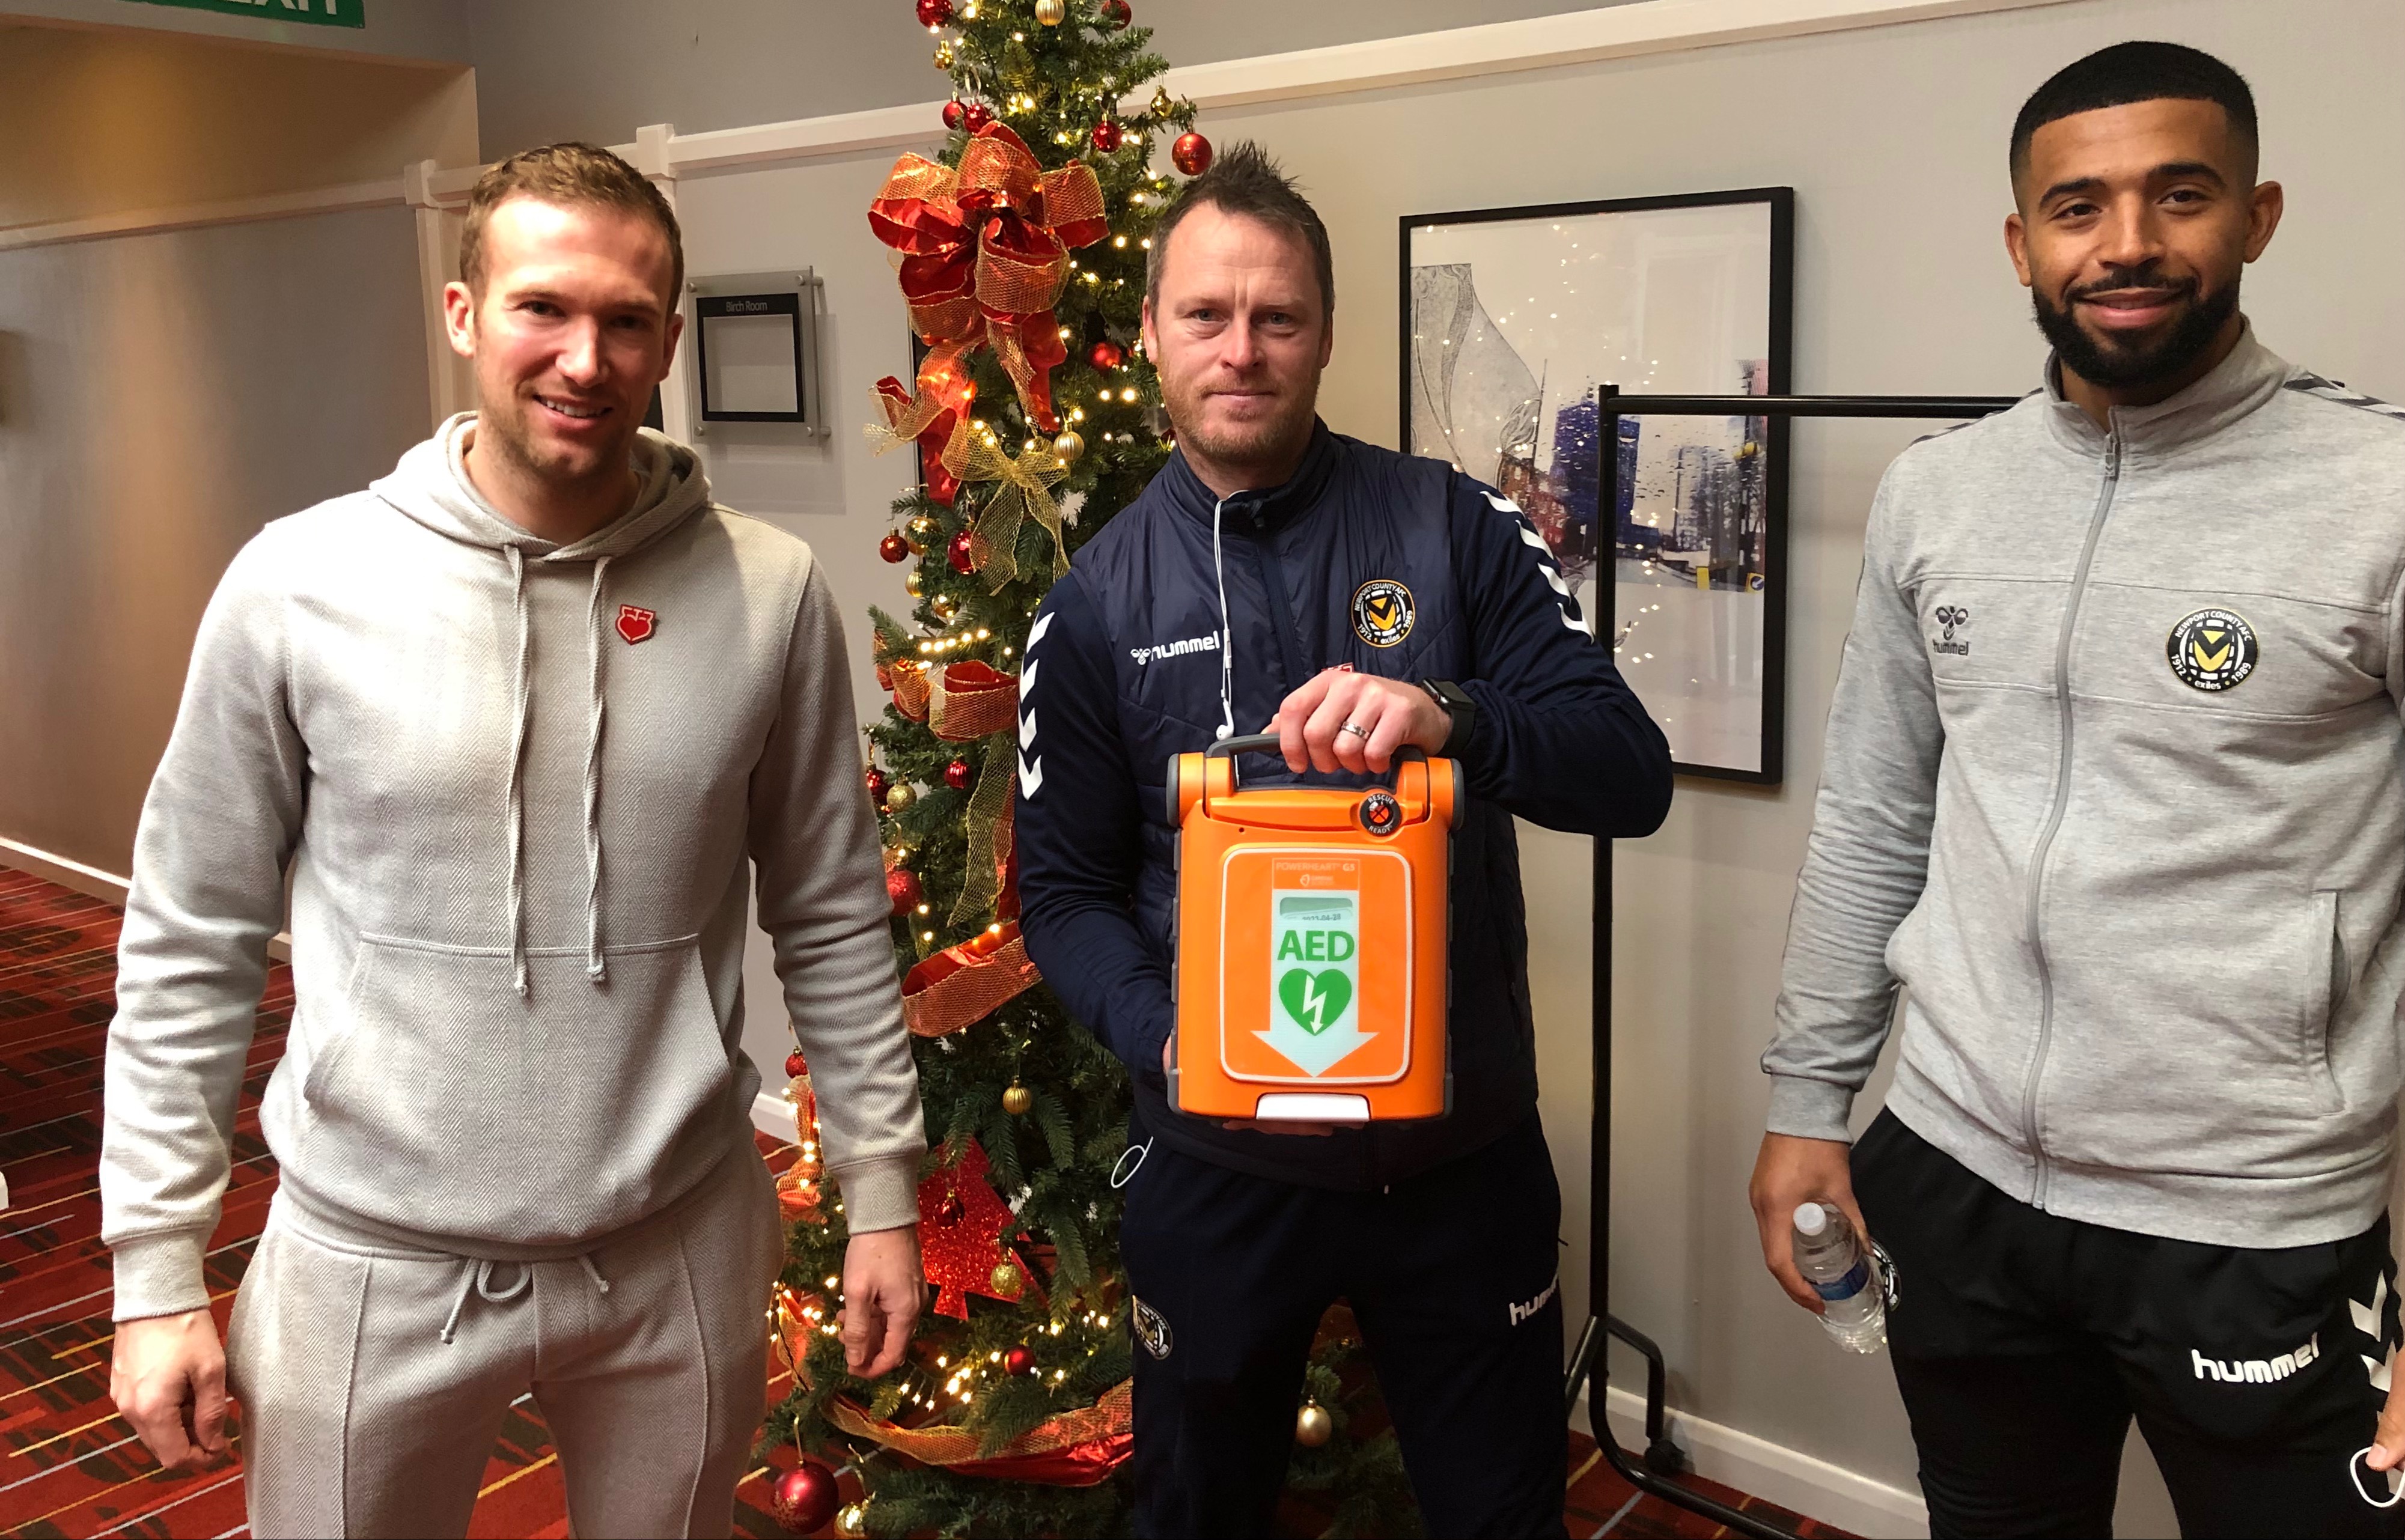 Charlie Edinburgh recently presented Newport manager Michael Flynn and captain Joss Labadie with an automated external defibrillator on behalf of the Justin Edinburgh 3 Foundation